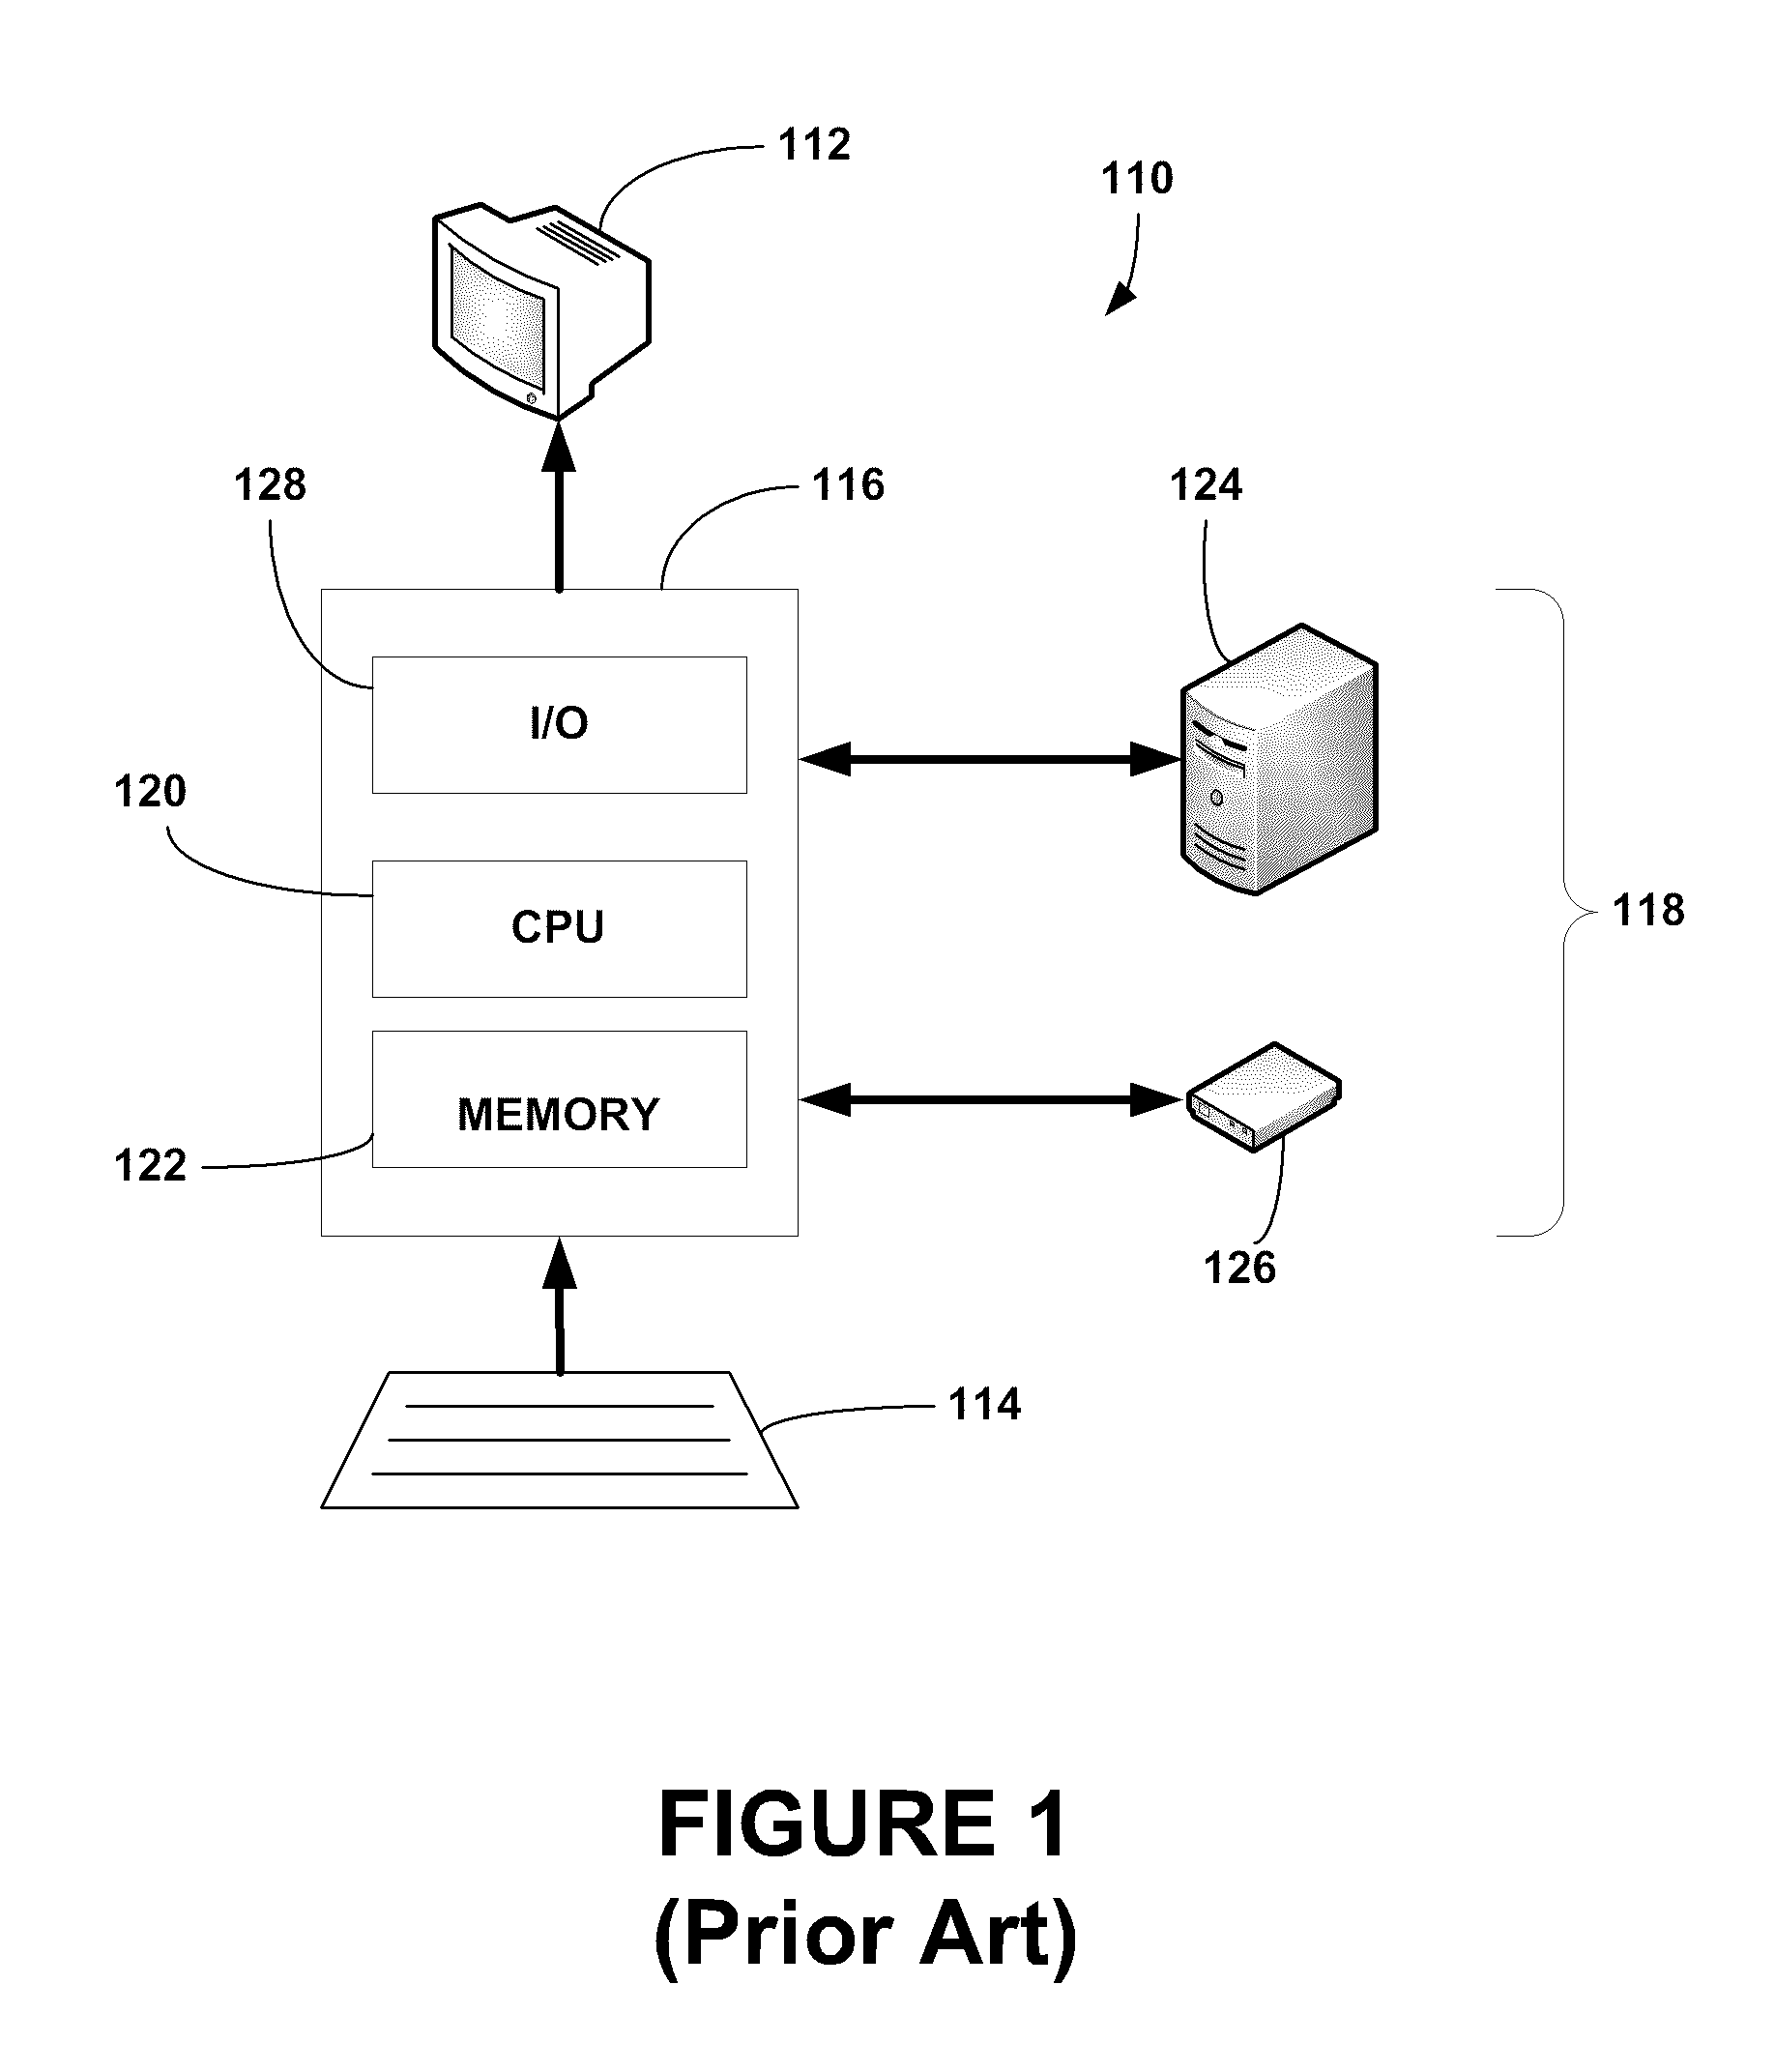 System and Method for Dynamic, Variably-Timed Operation Paths as a Resistance to Side Channel and Repeated Invocation Attacks